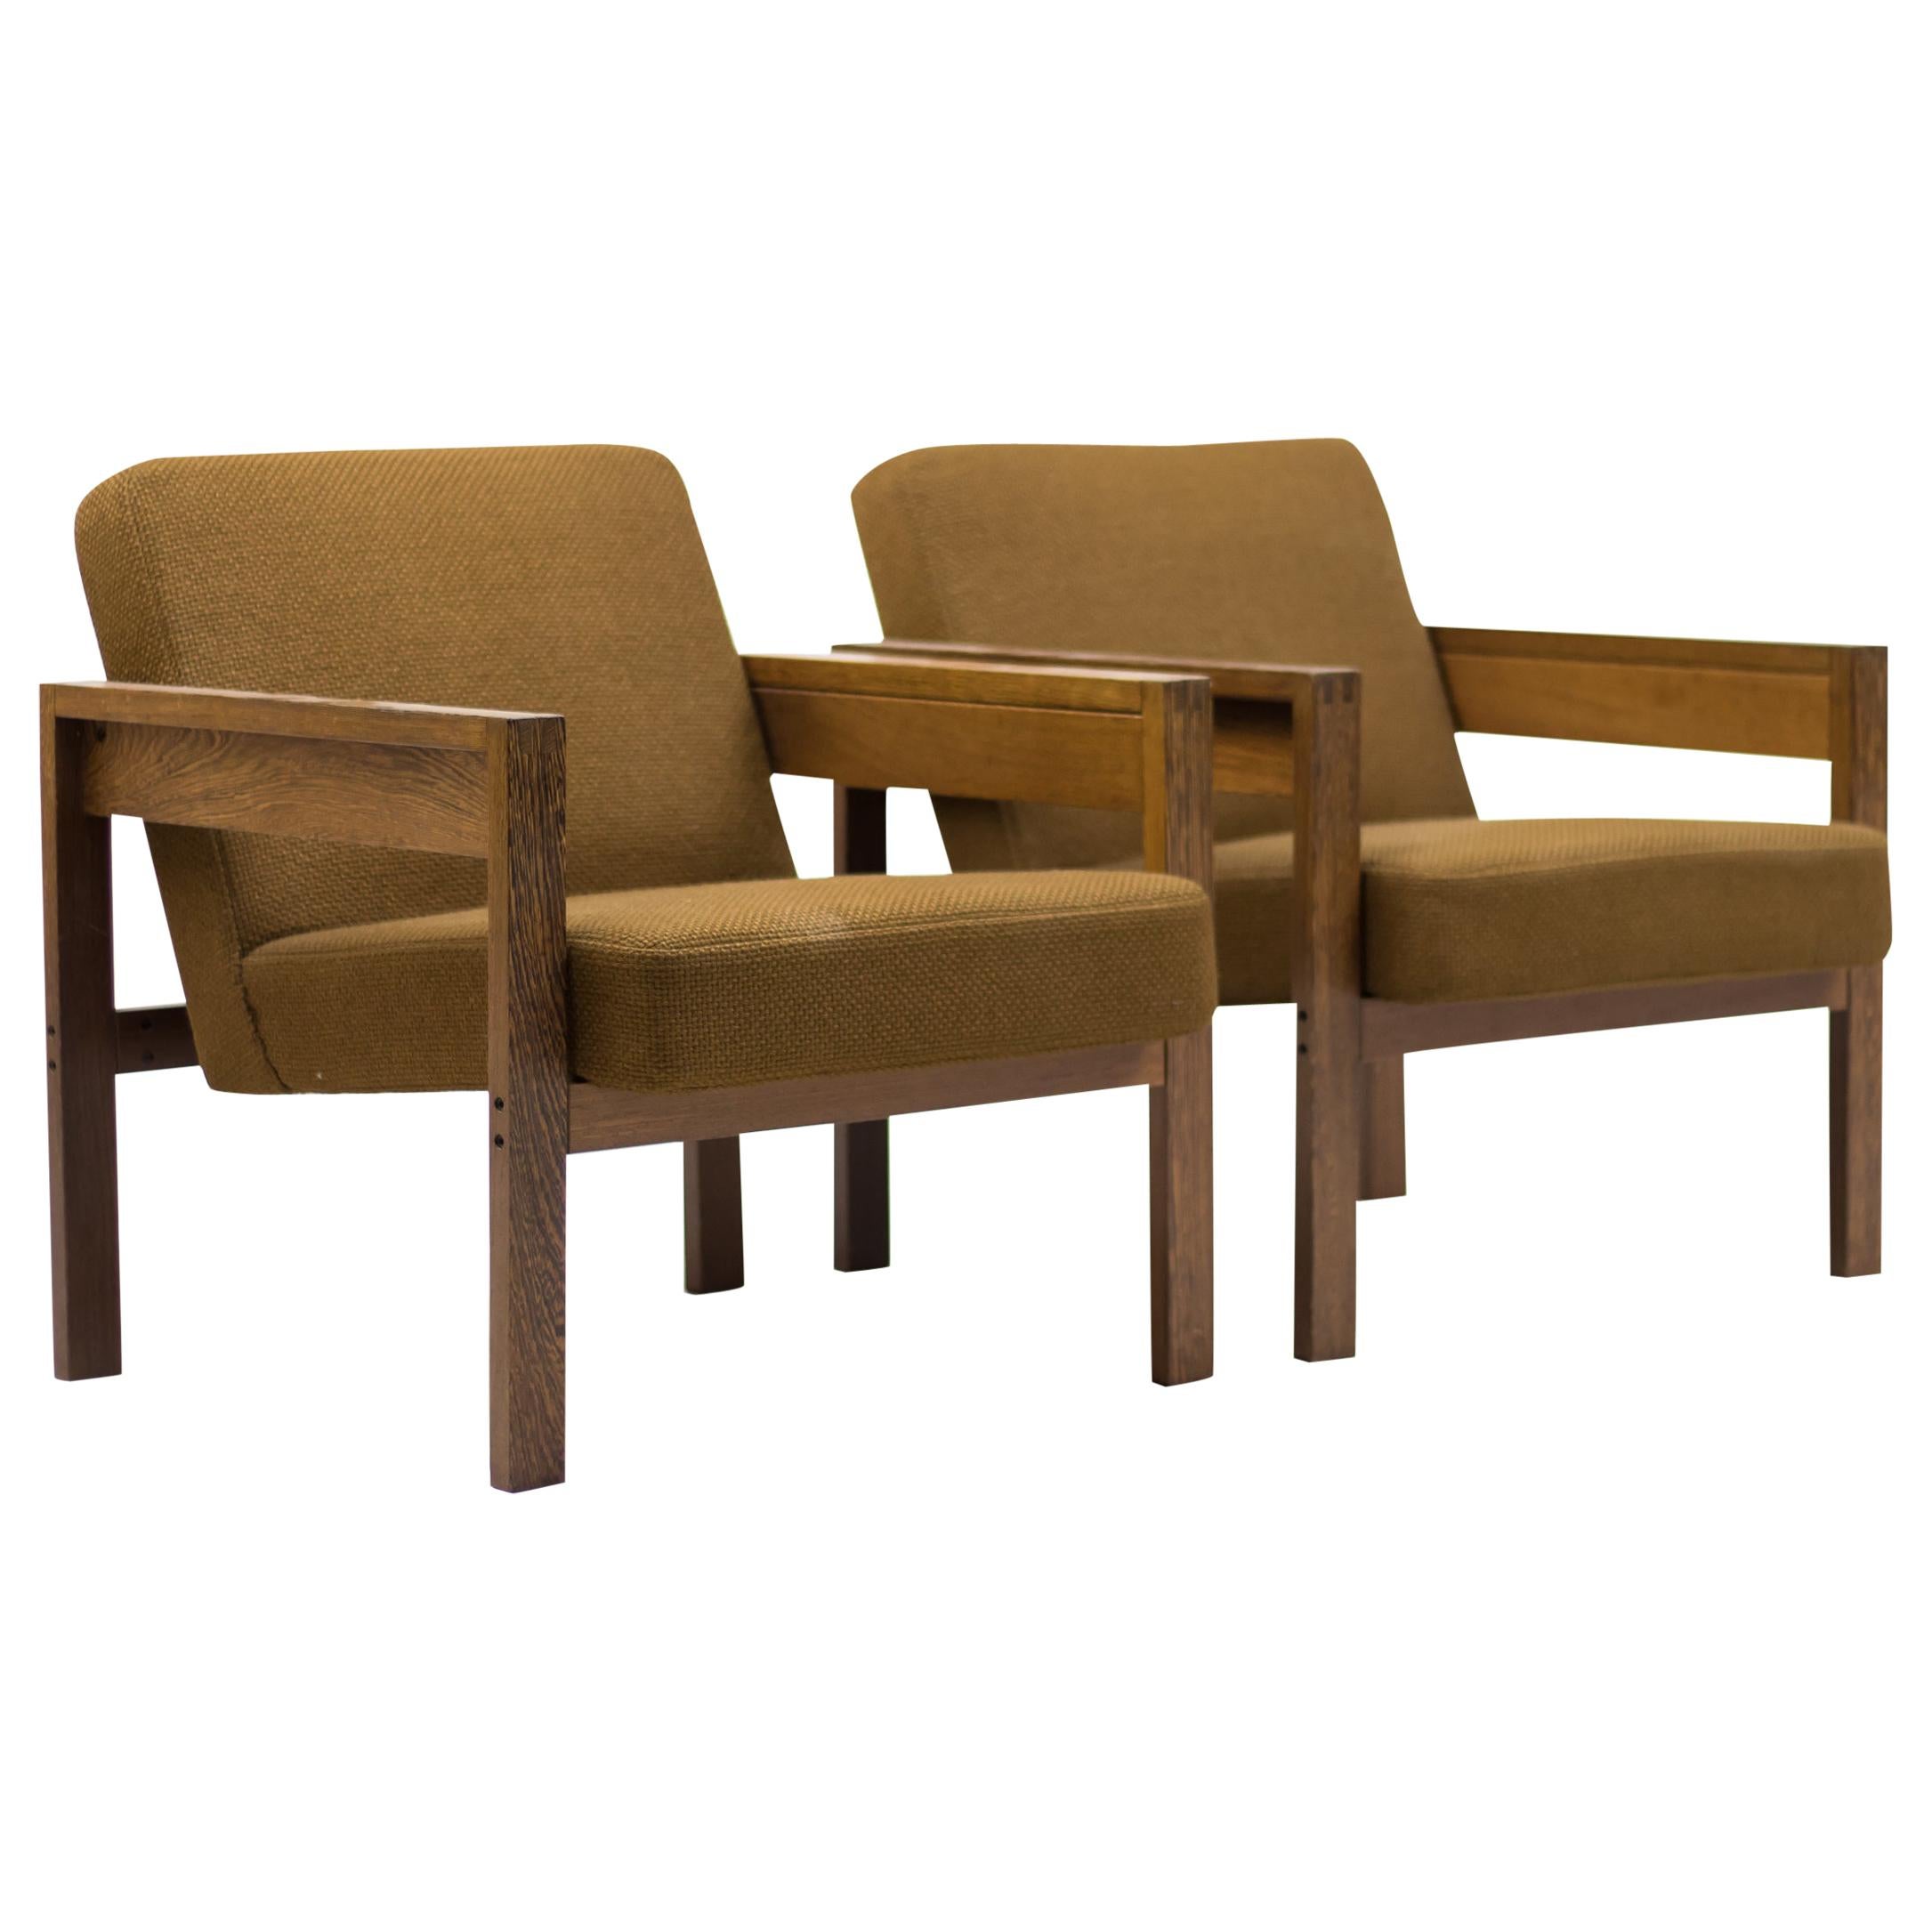 Pair of Armchairs by Hein Stolle